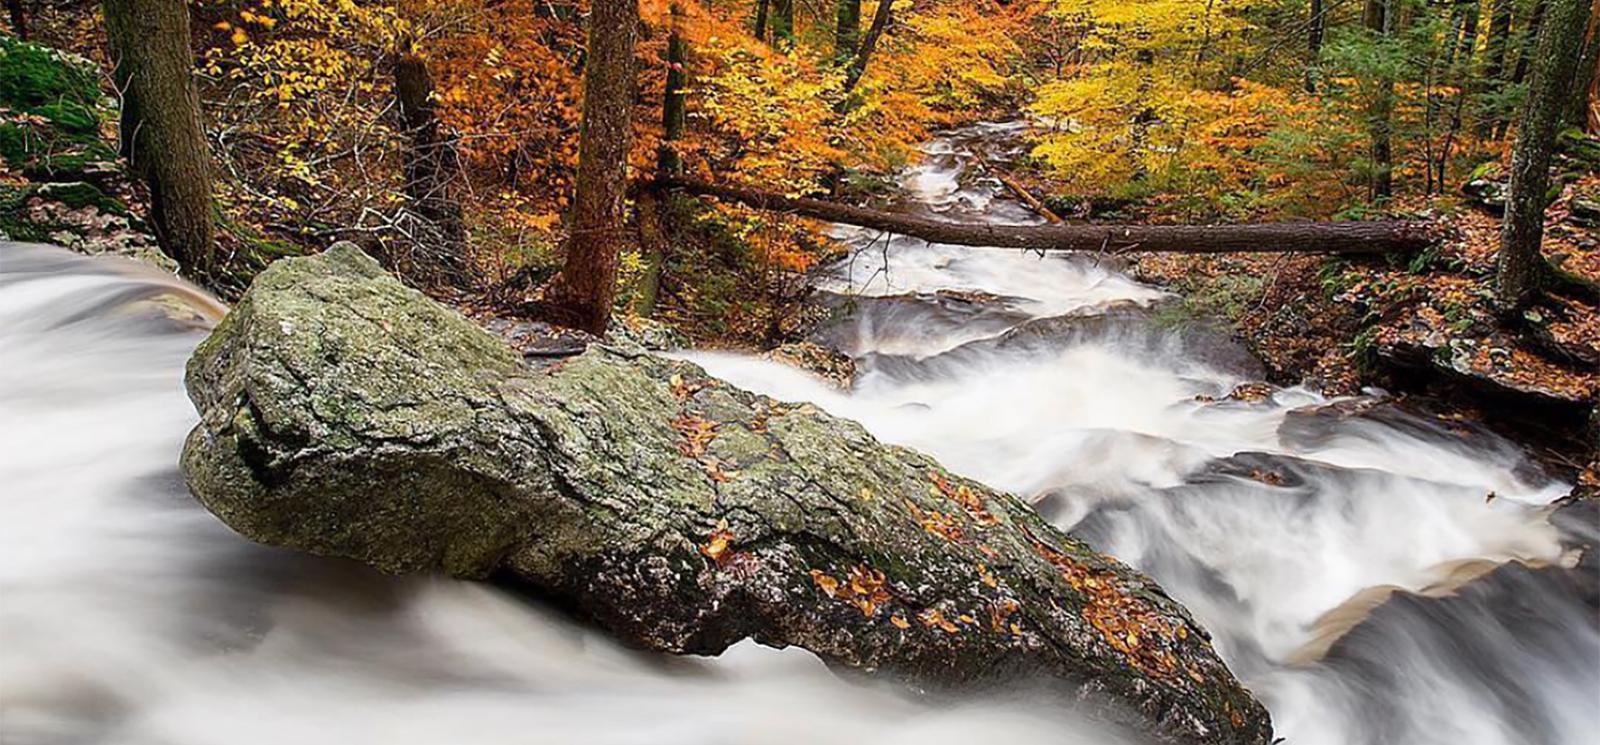 A rushing waterfall in the woods in fall (Instagram@nature_brilliance)